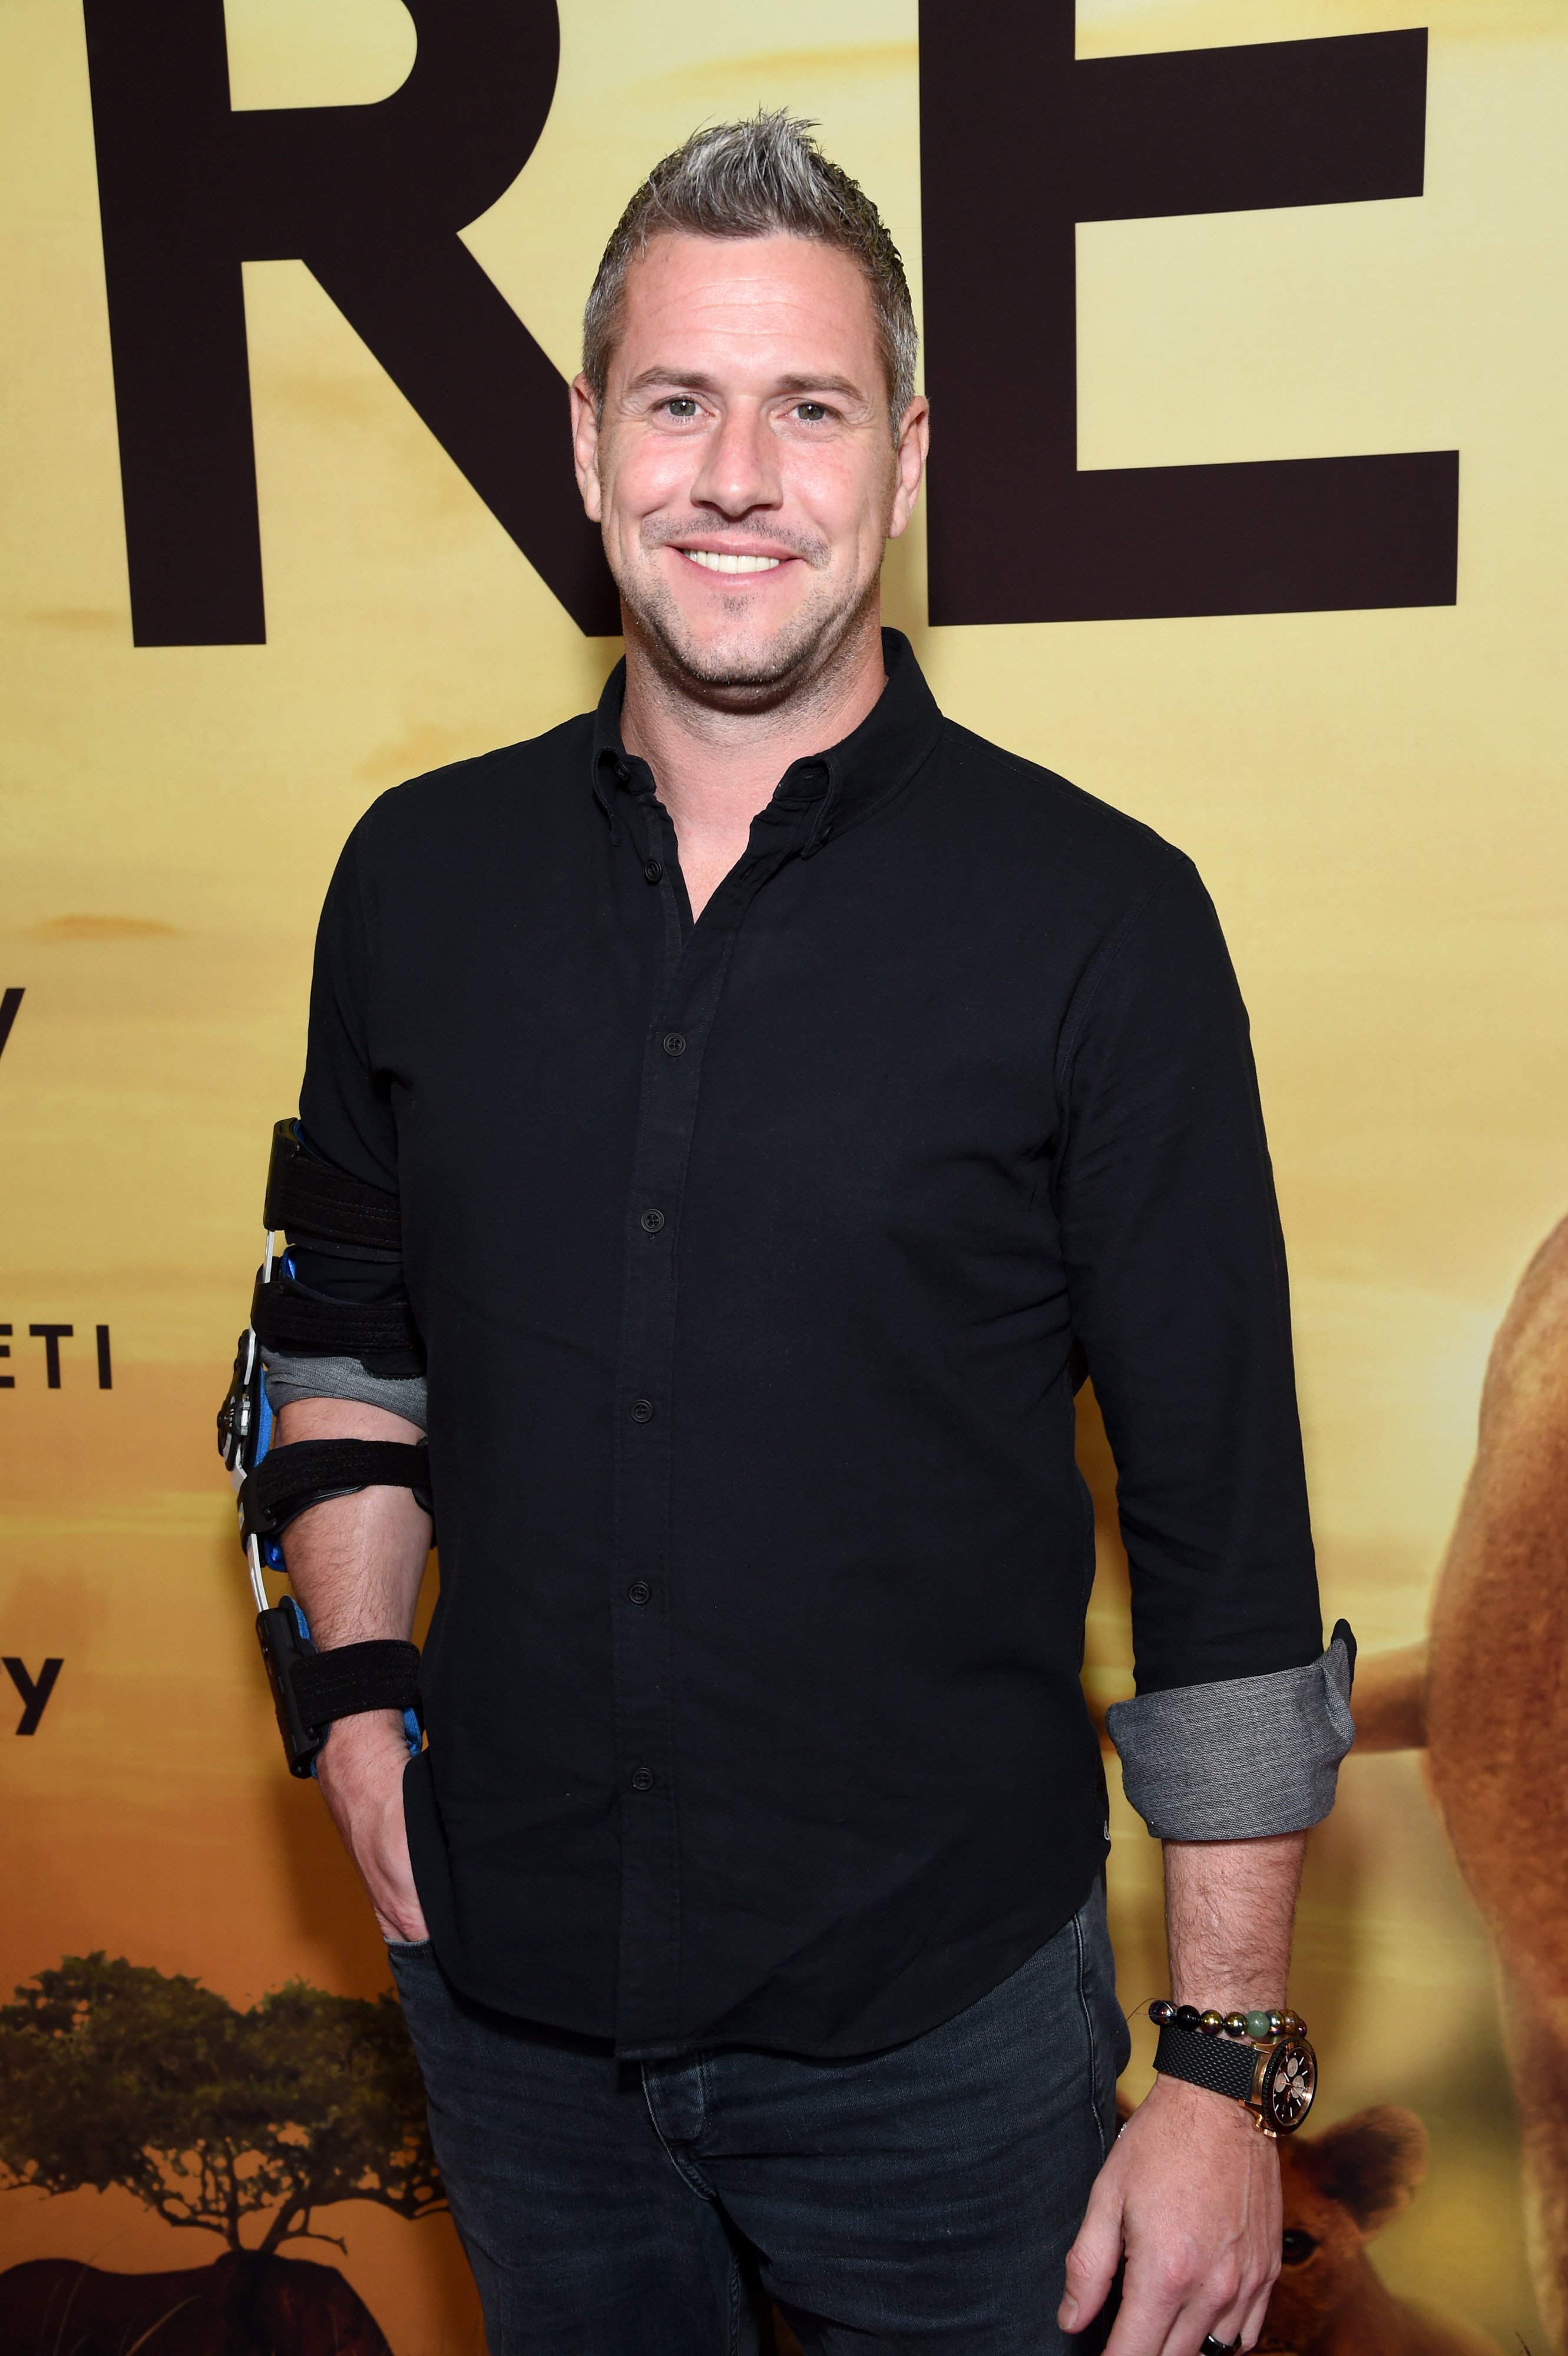  Ant Anstead attends Discovery's "Serengeti" premiere on July 23, 2019, in Beverly Hills, California. | Source: Getty Images.